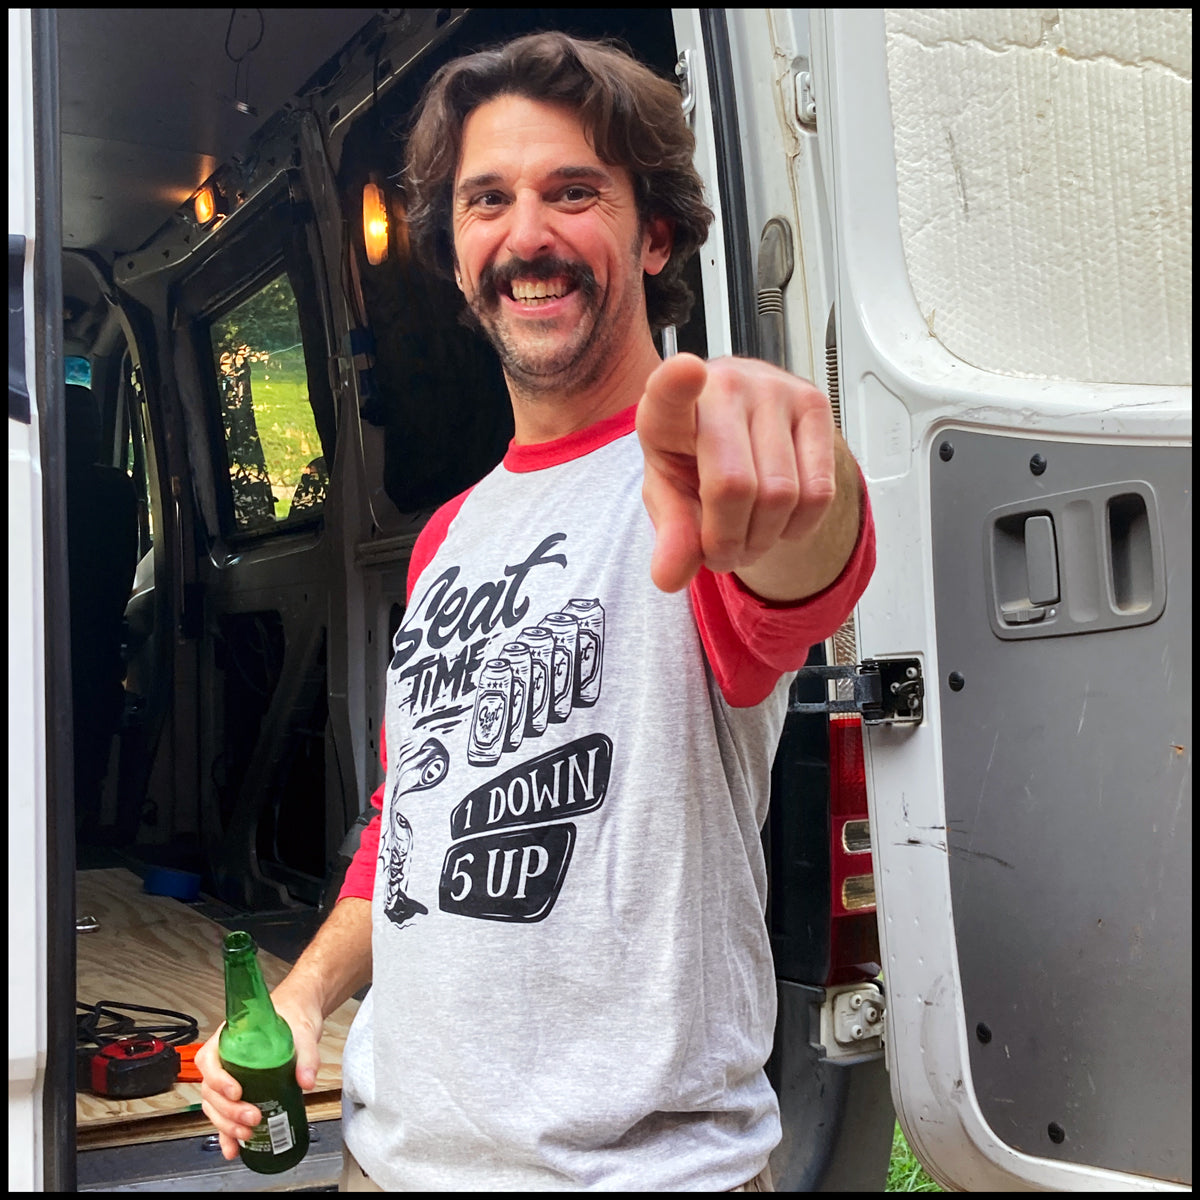 Lifestyle shot of Brian Pierce, the Purveyor of Awesome himself, showing off the One Down Five Up Raglan Shirt